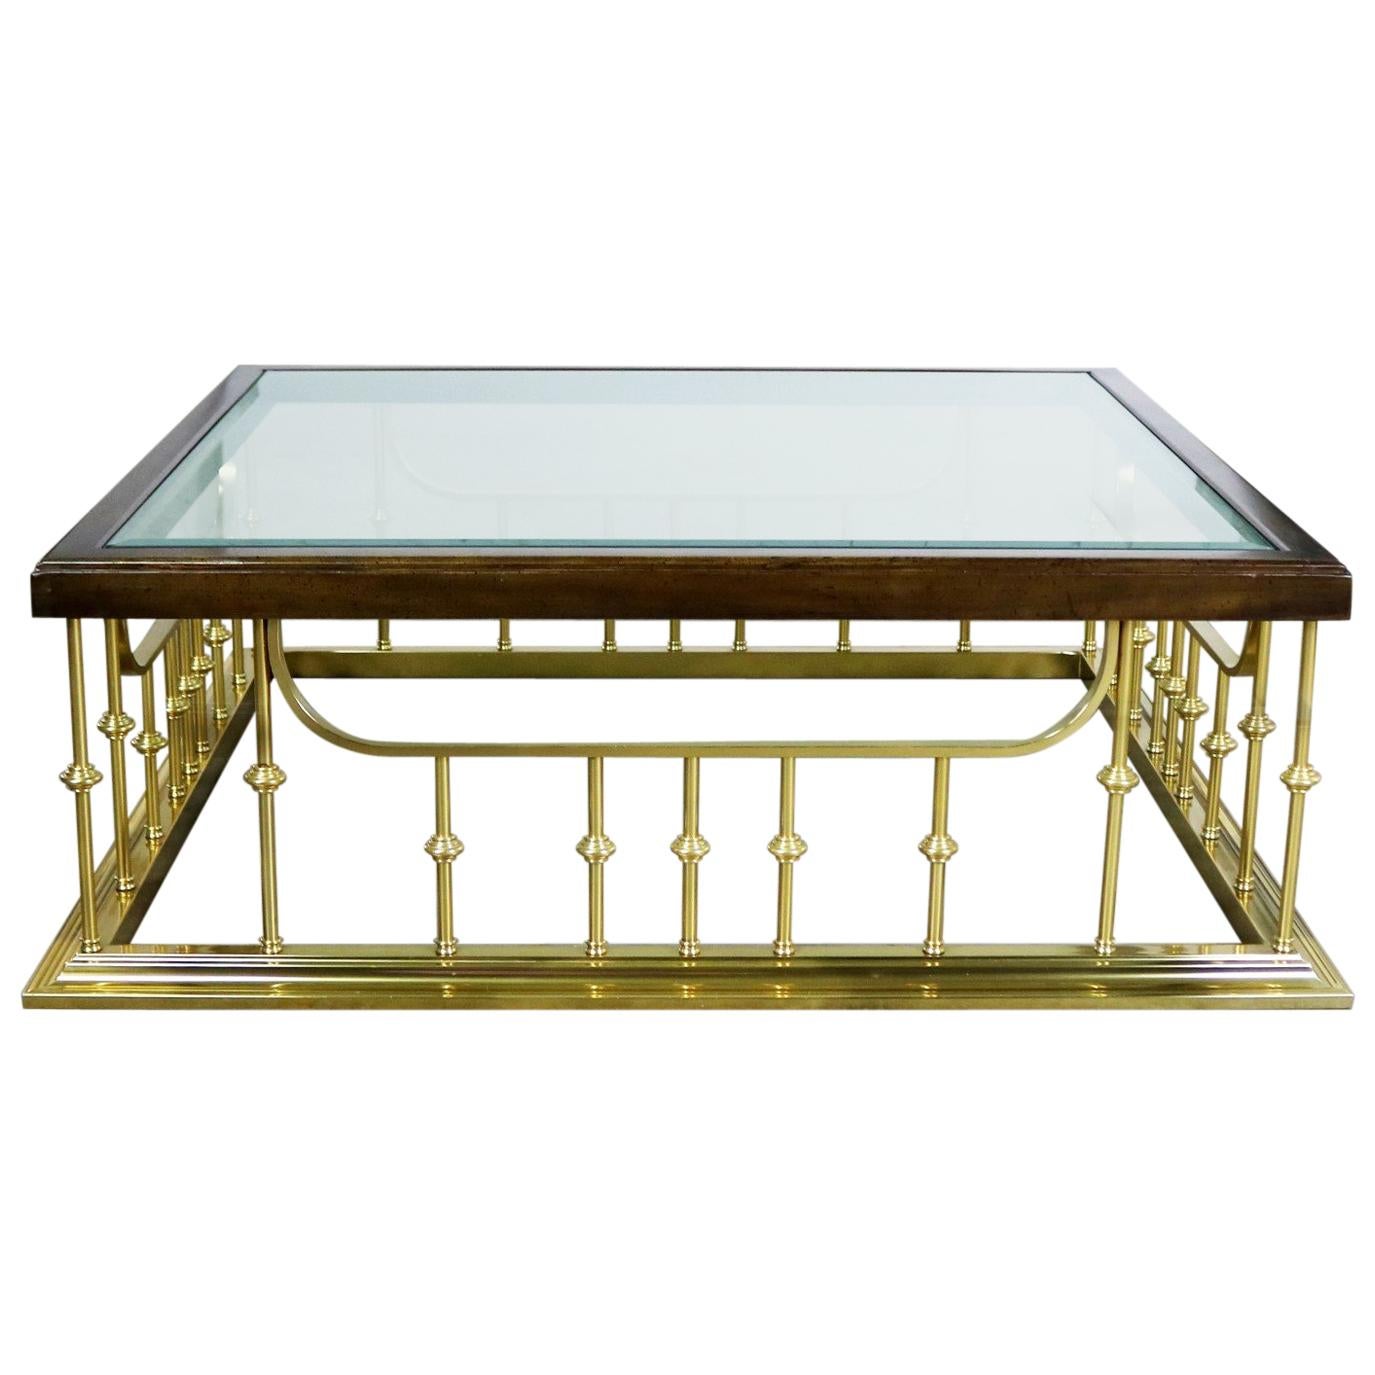 Brass Glass Wood Fireplace Fender Style Erwin Lambeth Large Square Coffee Table